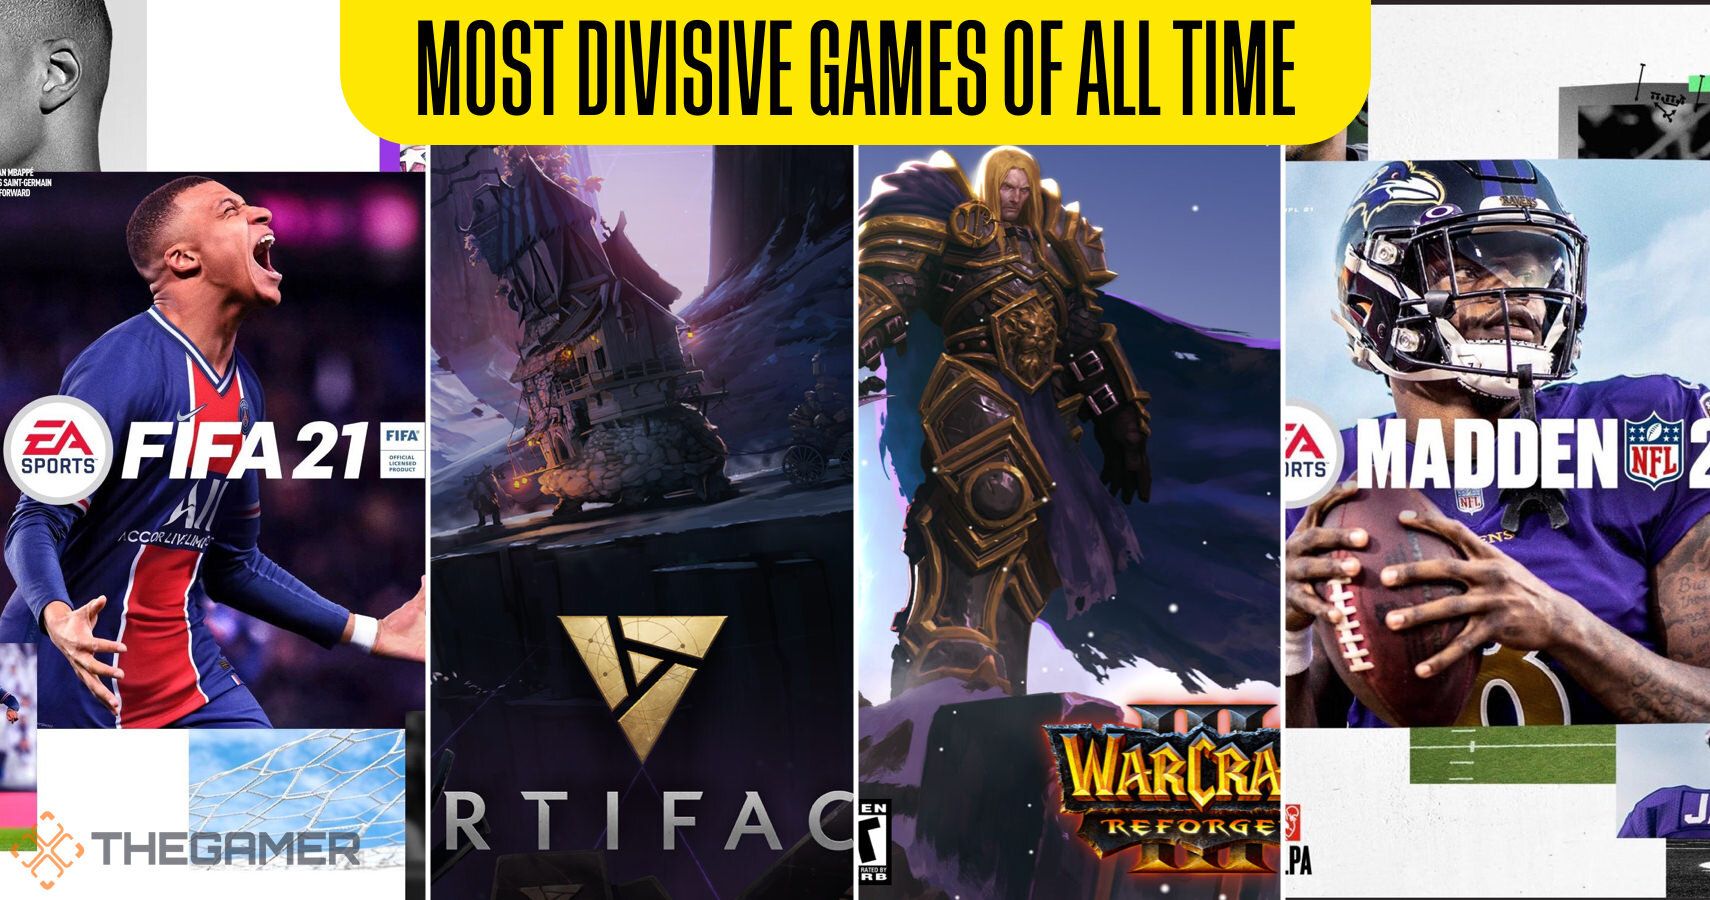 Most Divisive Games Of All Time